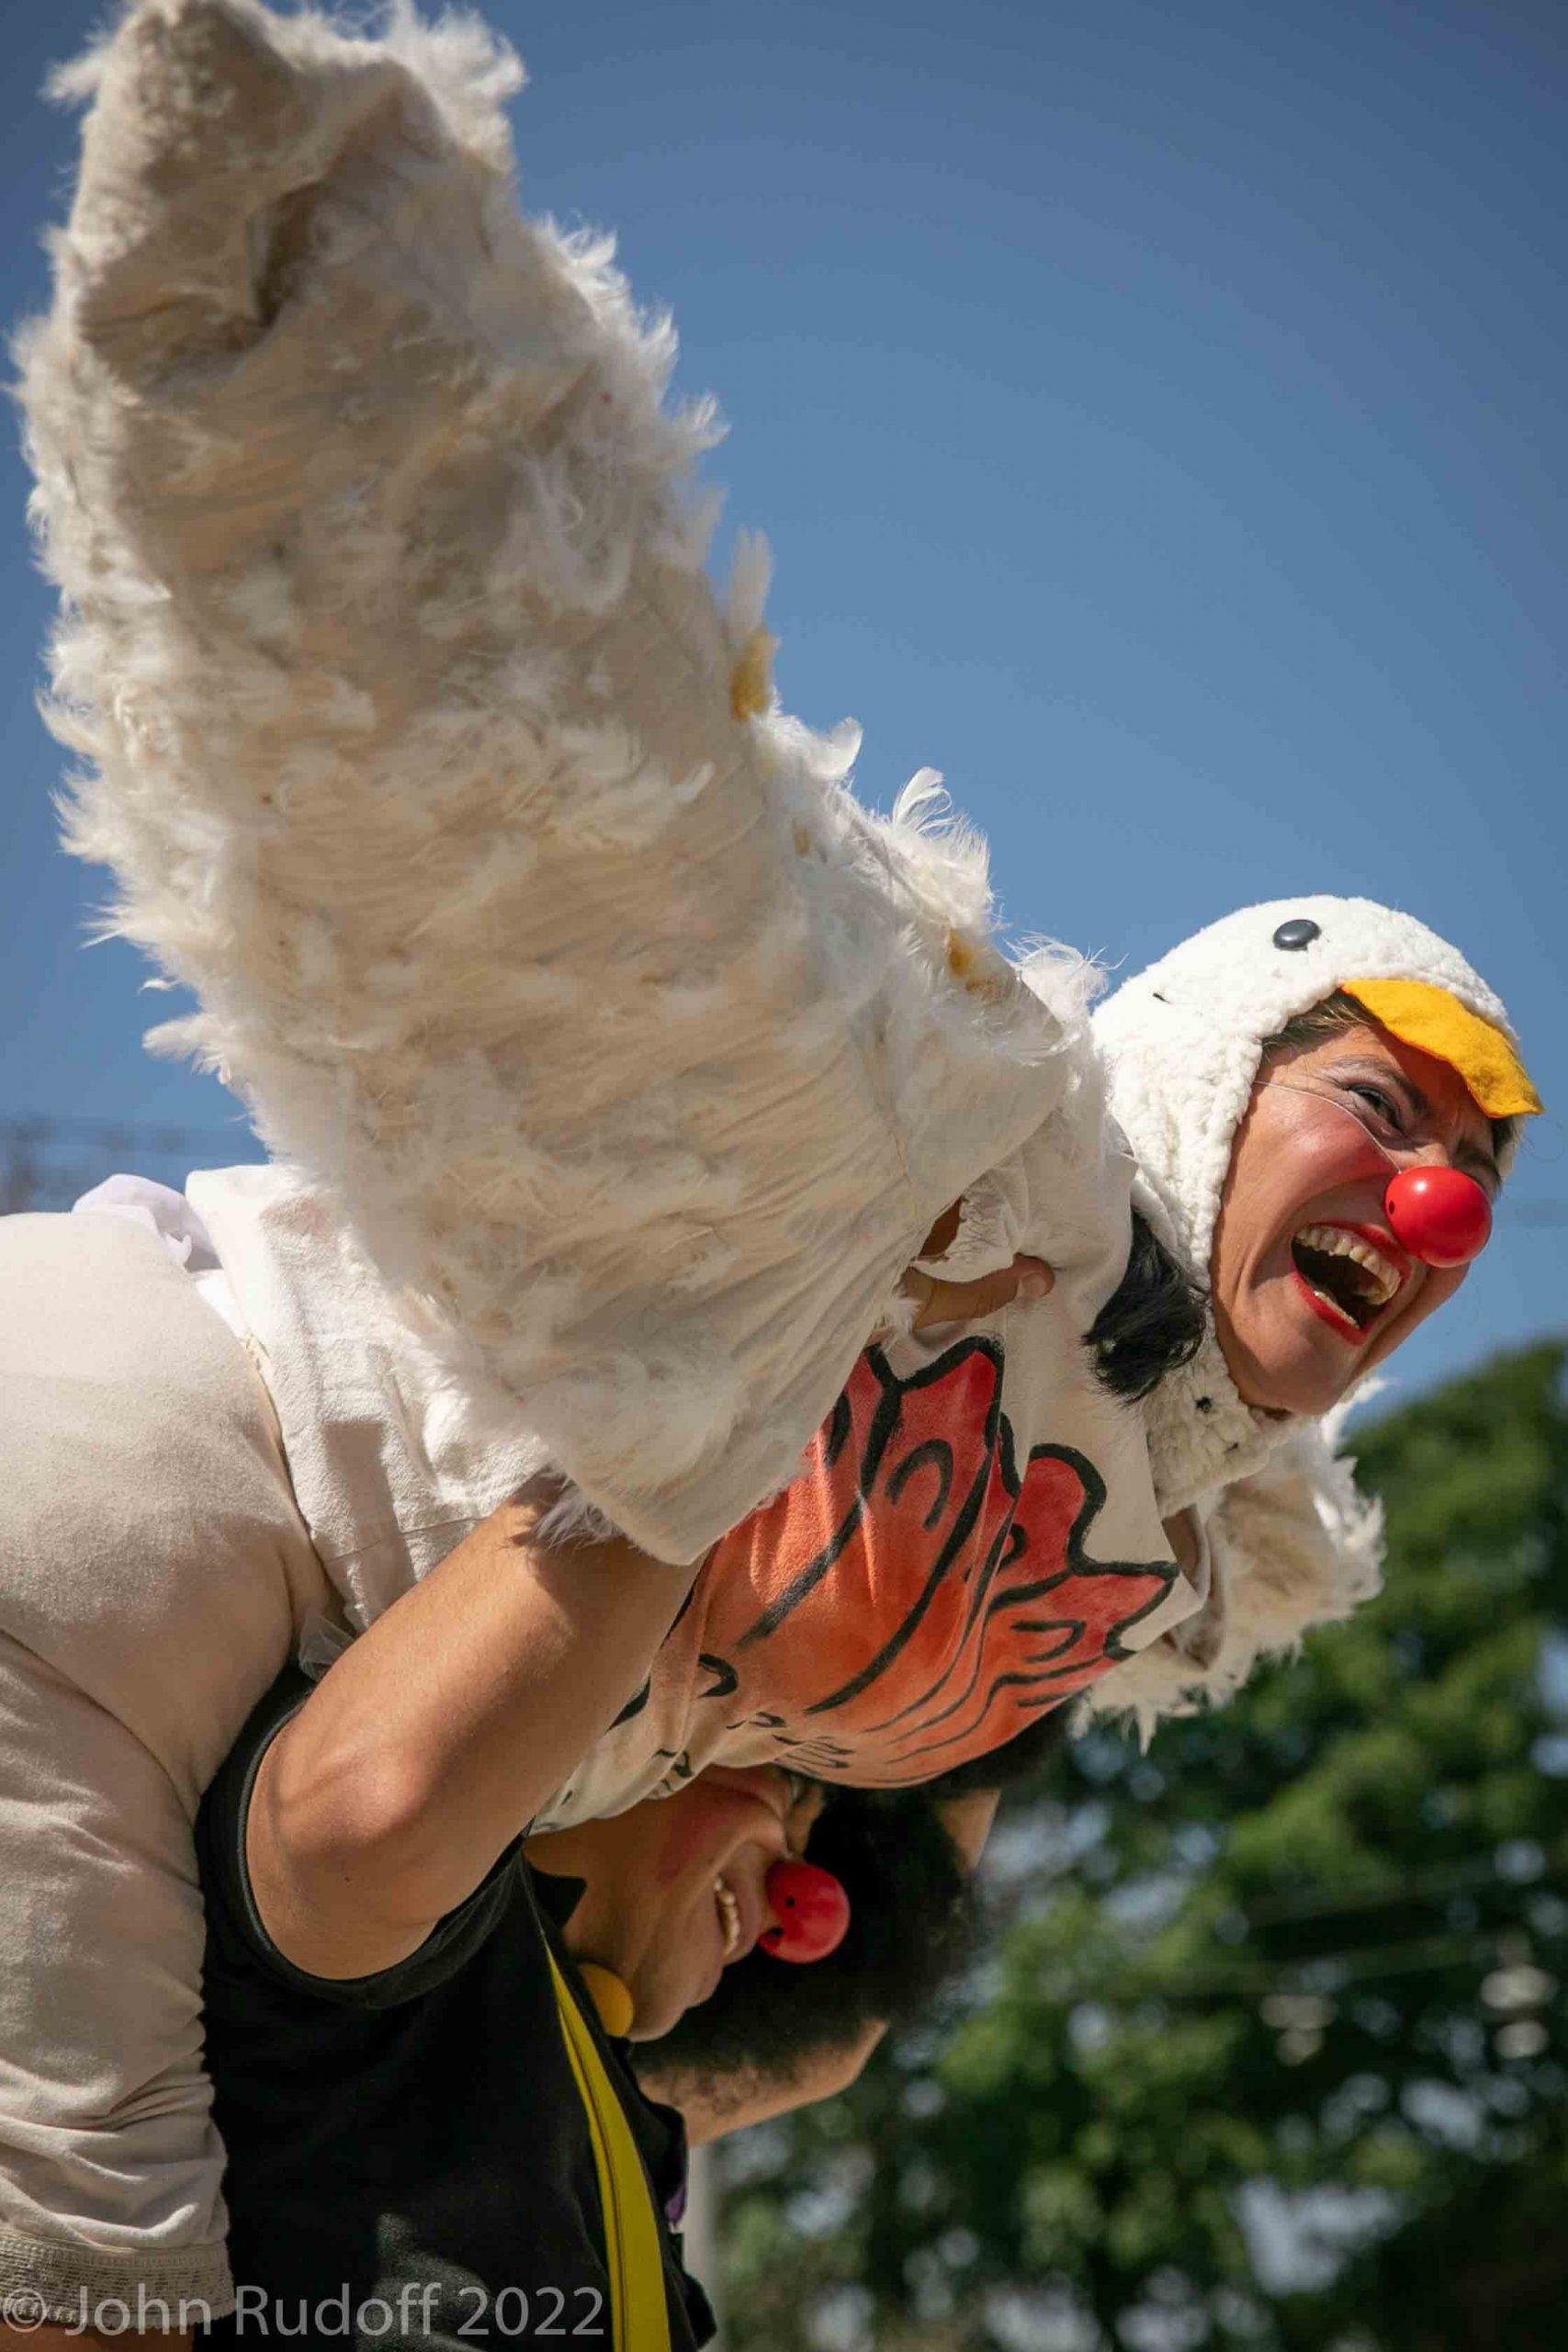 Clown in chicken costume being lifted up by another clown